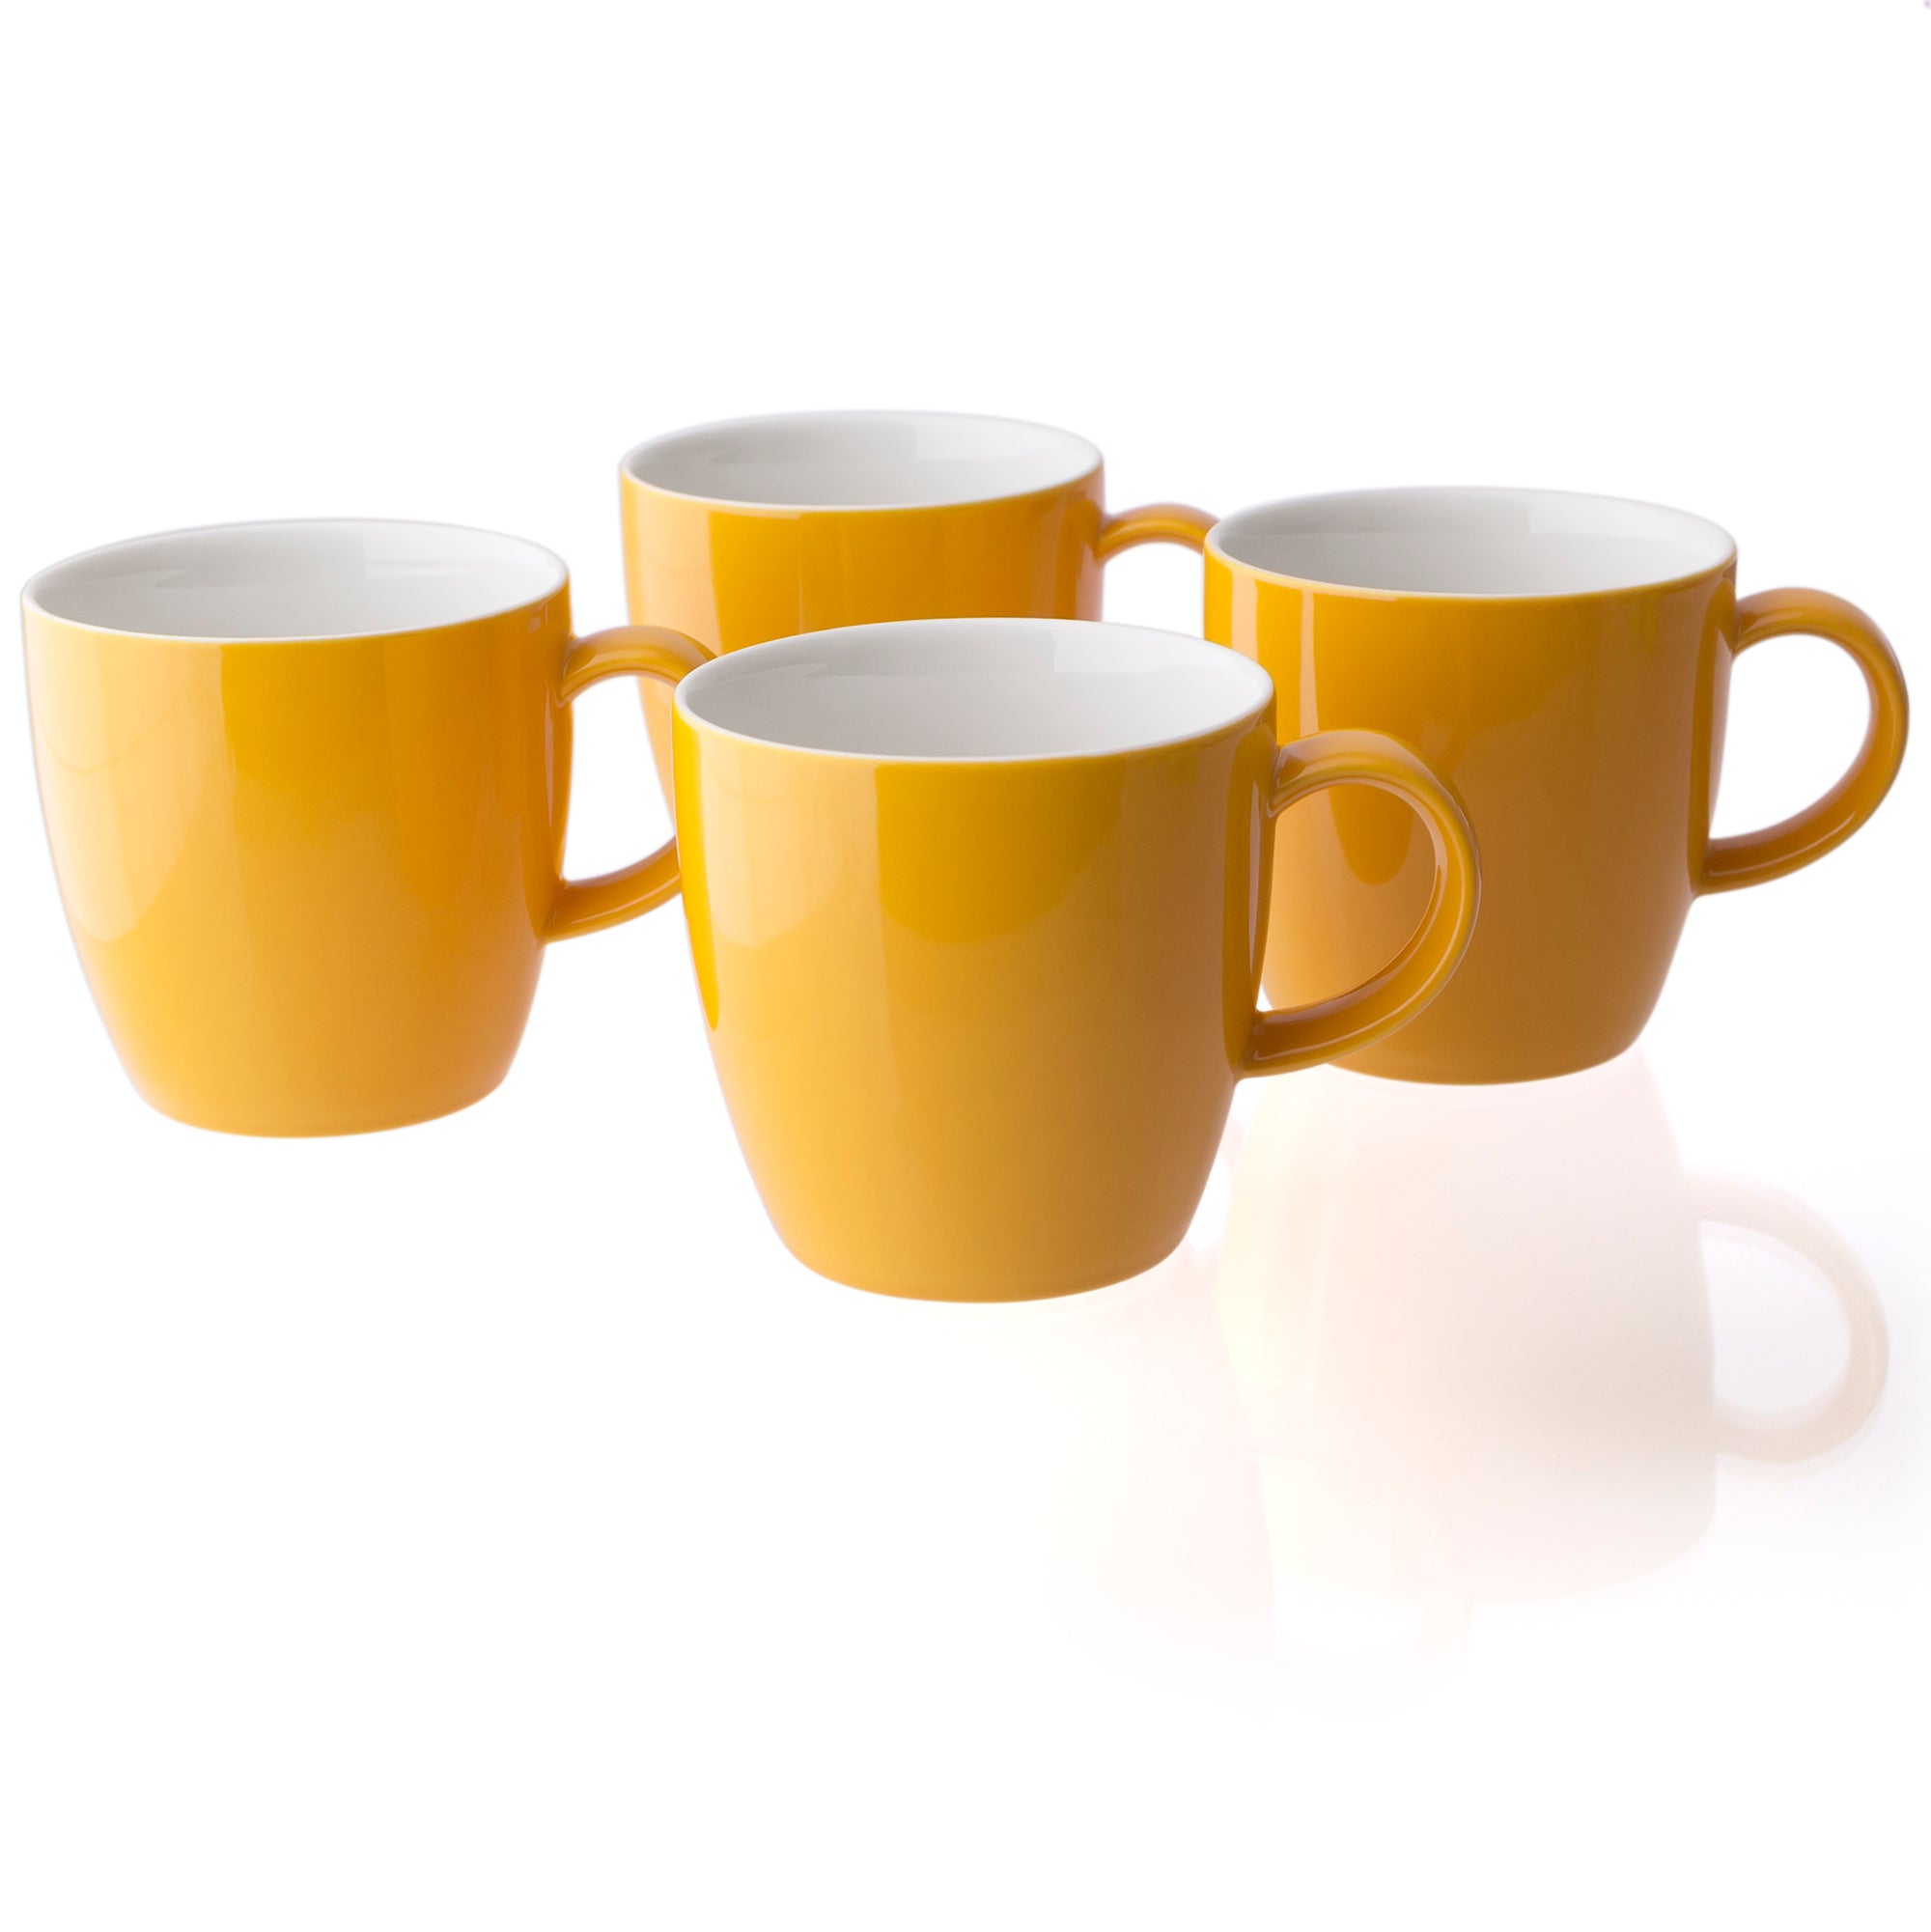 Uni Tea/Coffee Cup with handle - 11 oz., 4 pc pack – FORLIFE Design